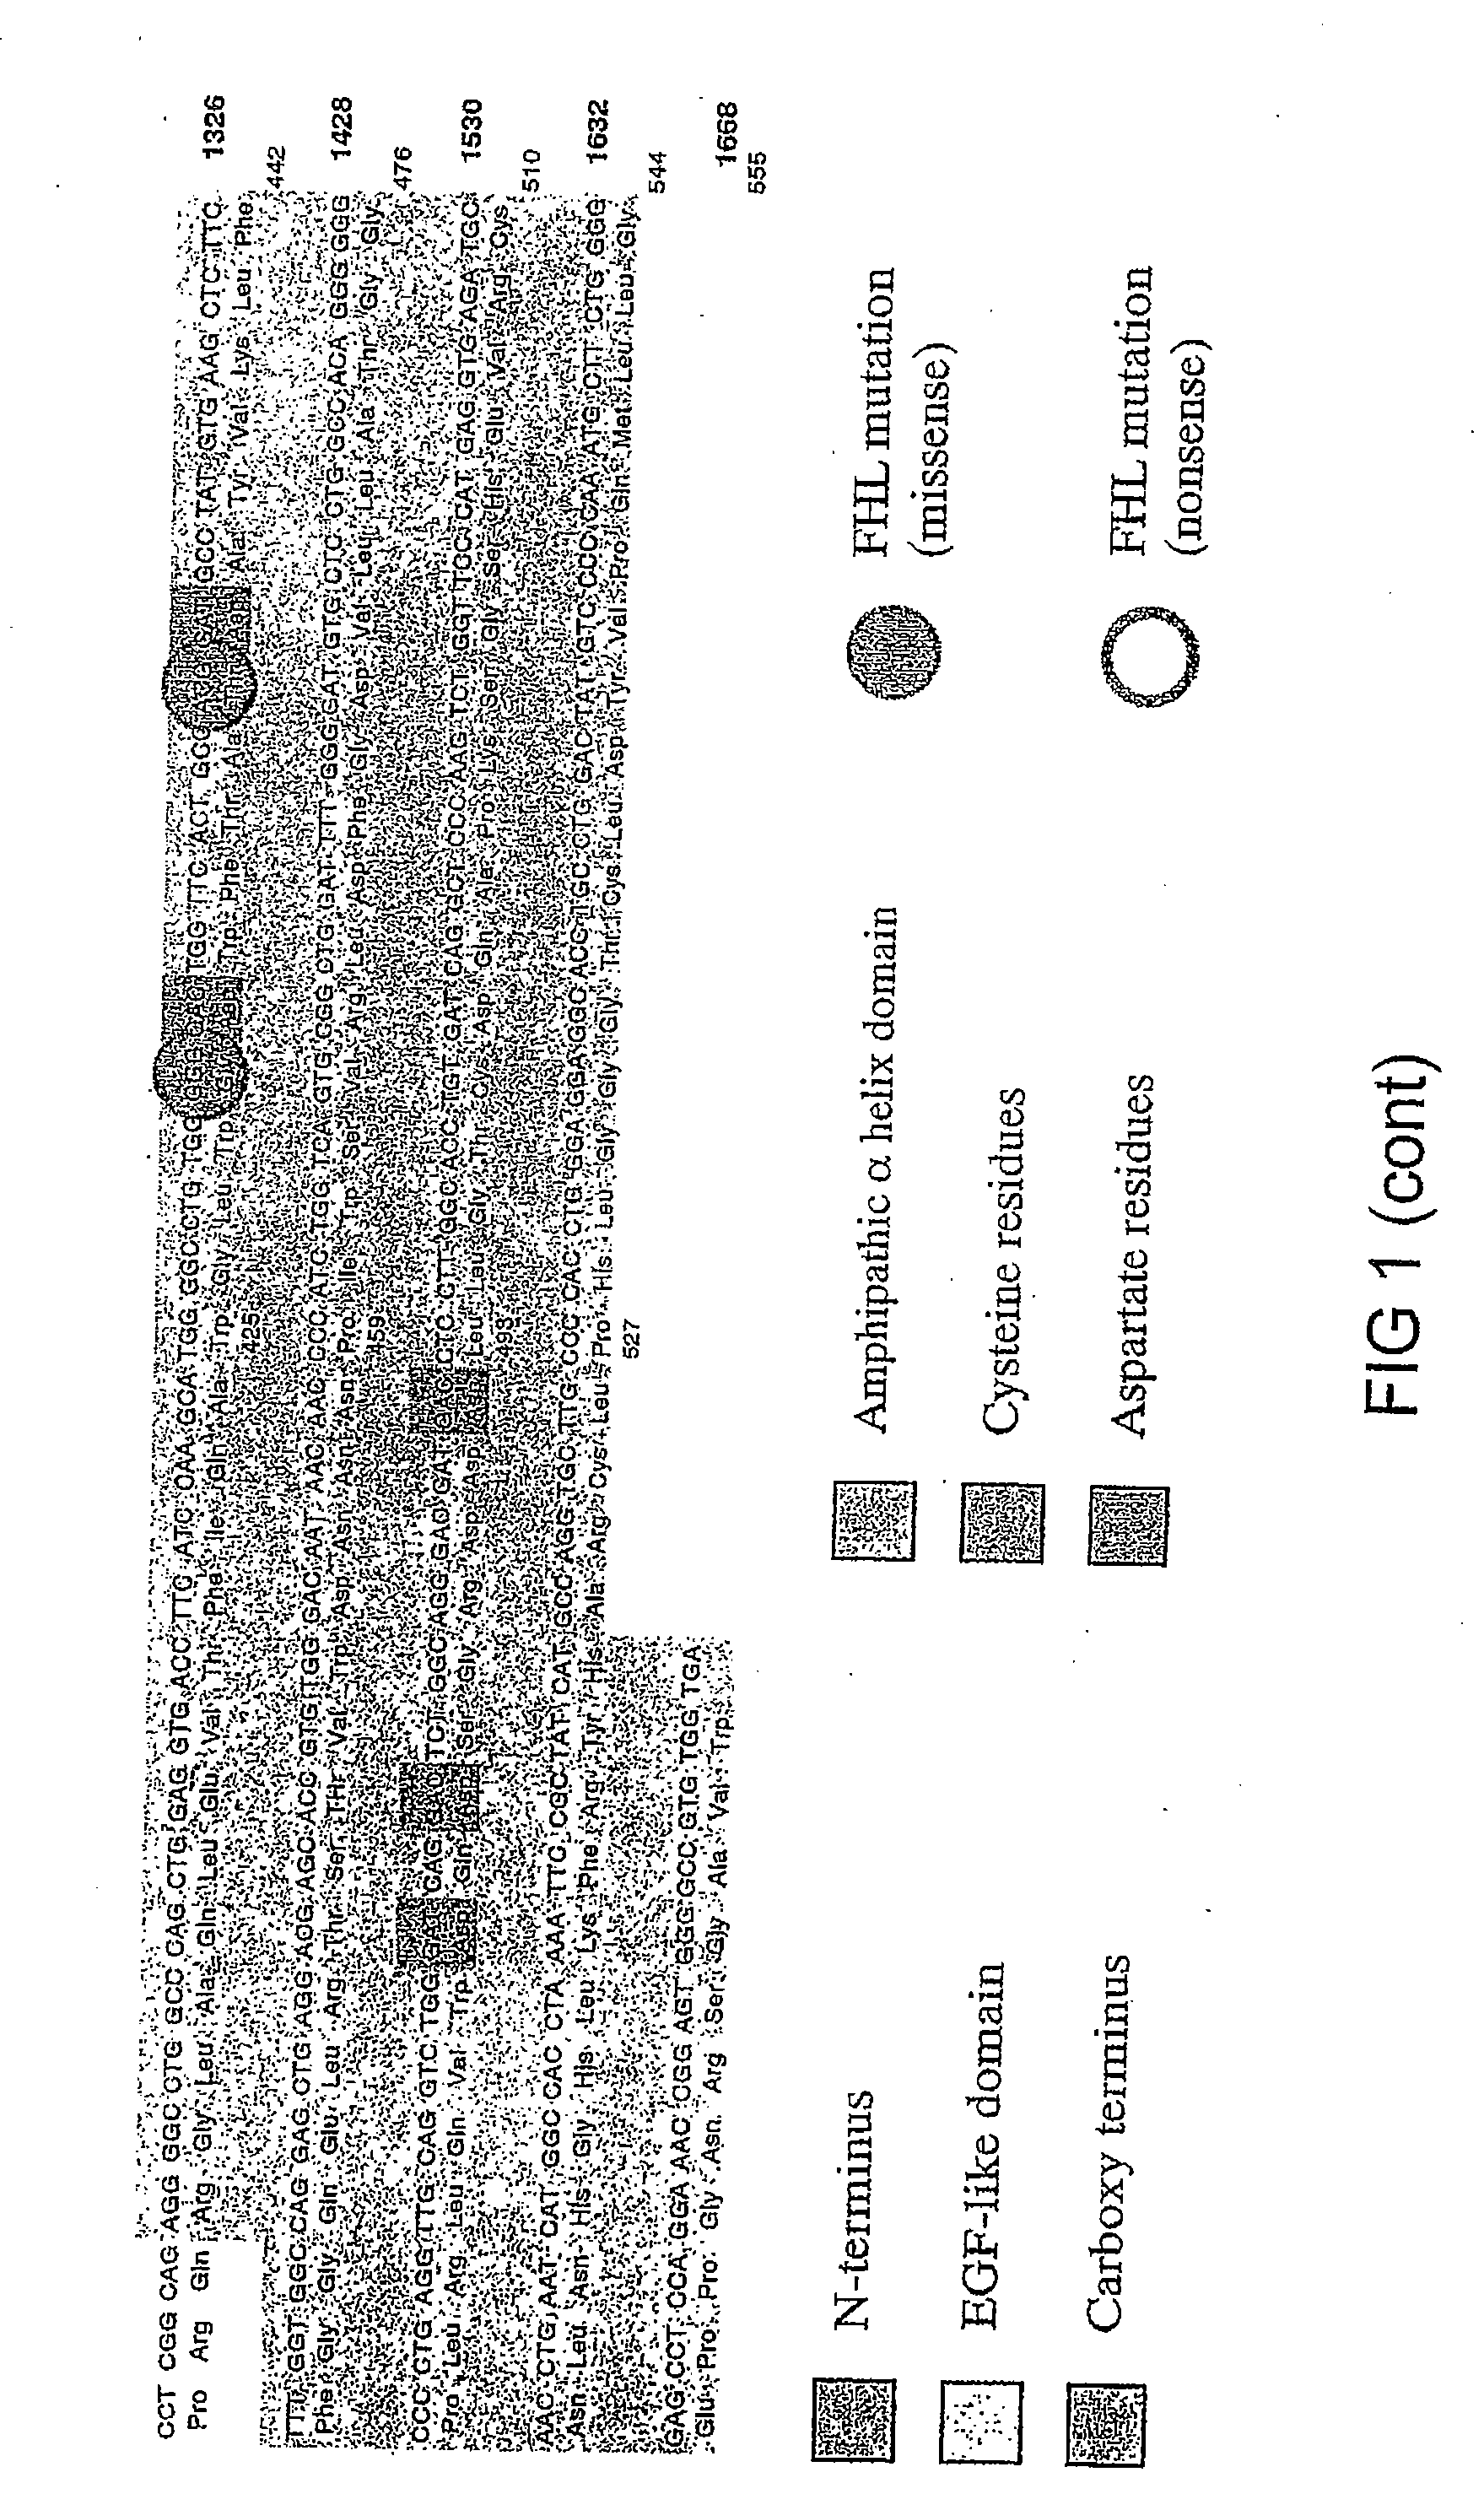 Recombinant perforin, expression and uses thereof